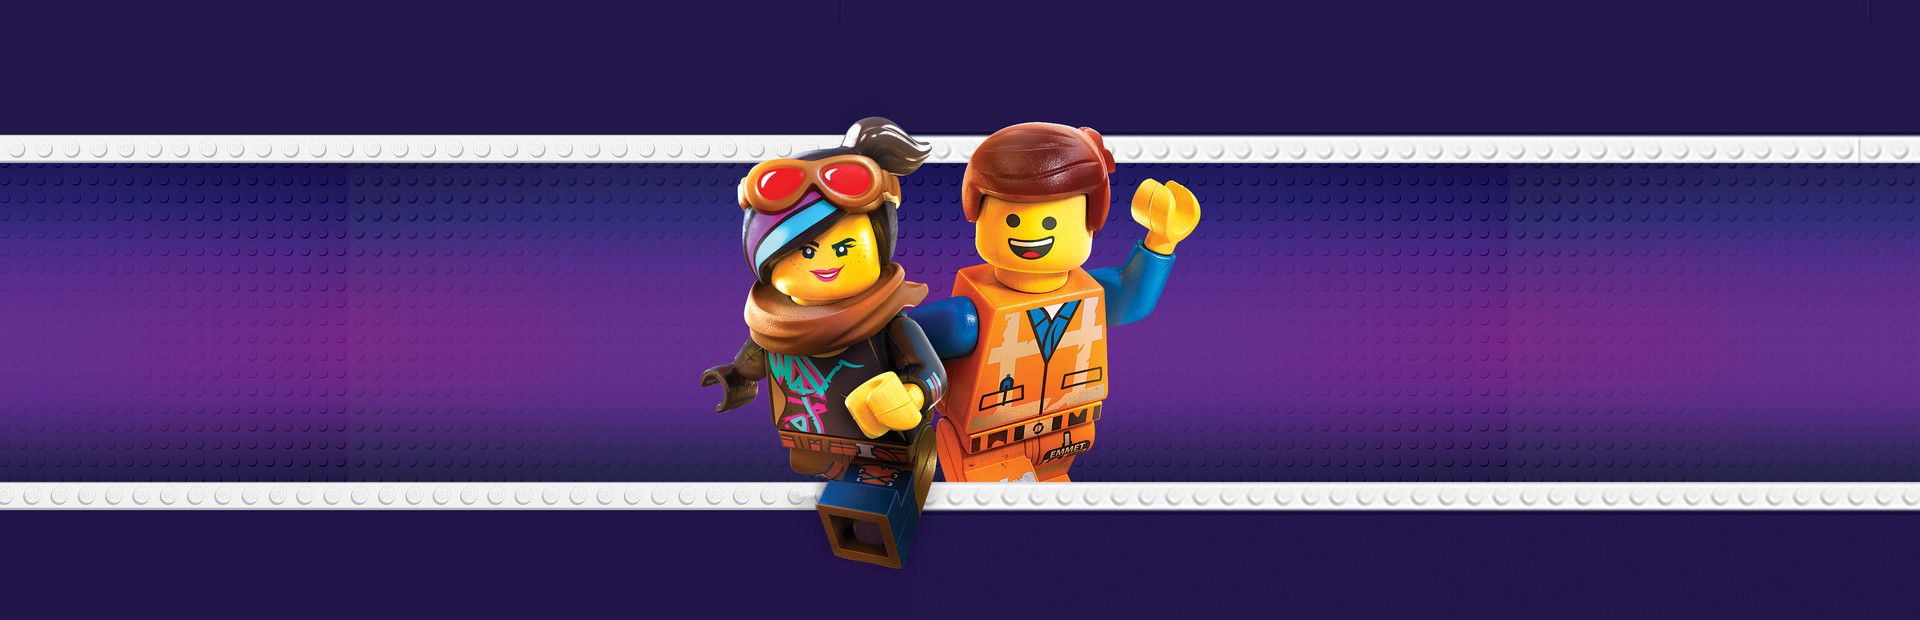 The LEGO Movie 2 Videogame cover image